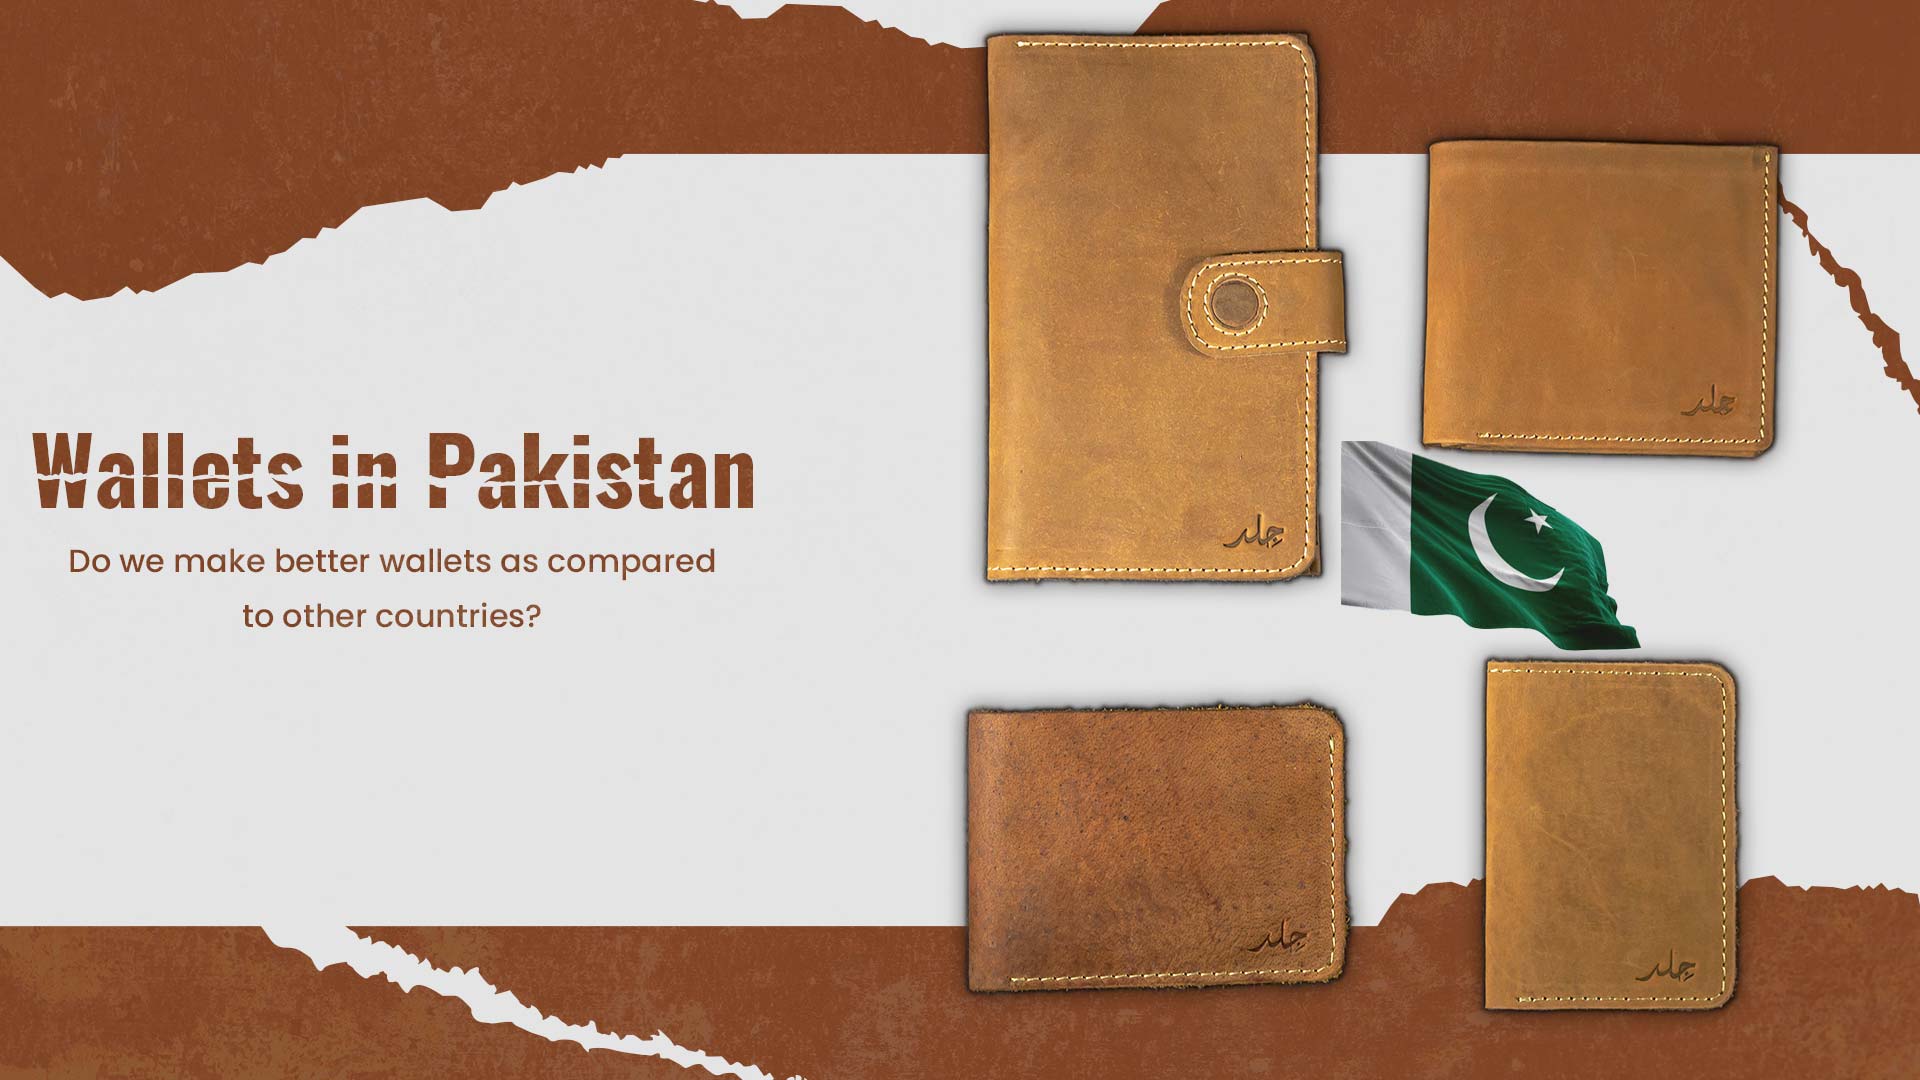 Are Wallets Made in Pakistan from Leather Better Than Those Made in Other Countries?